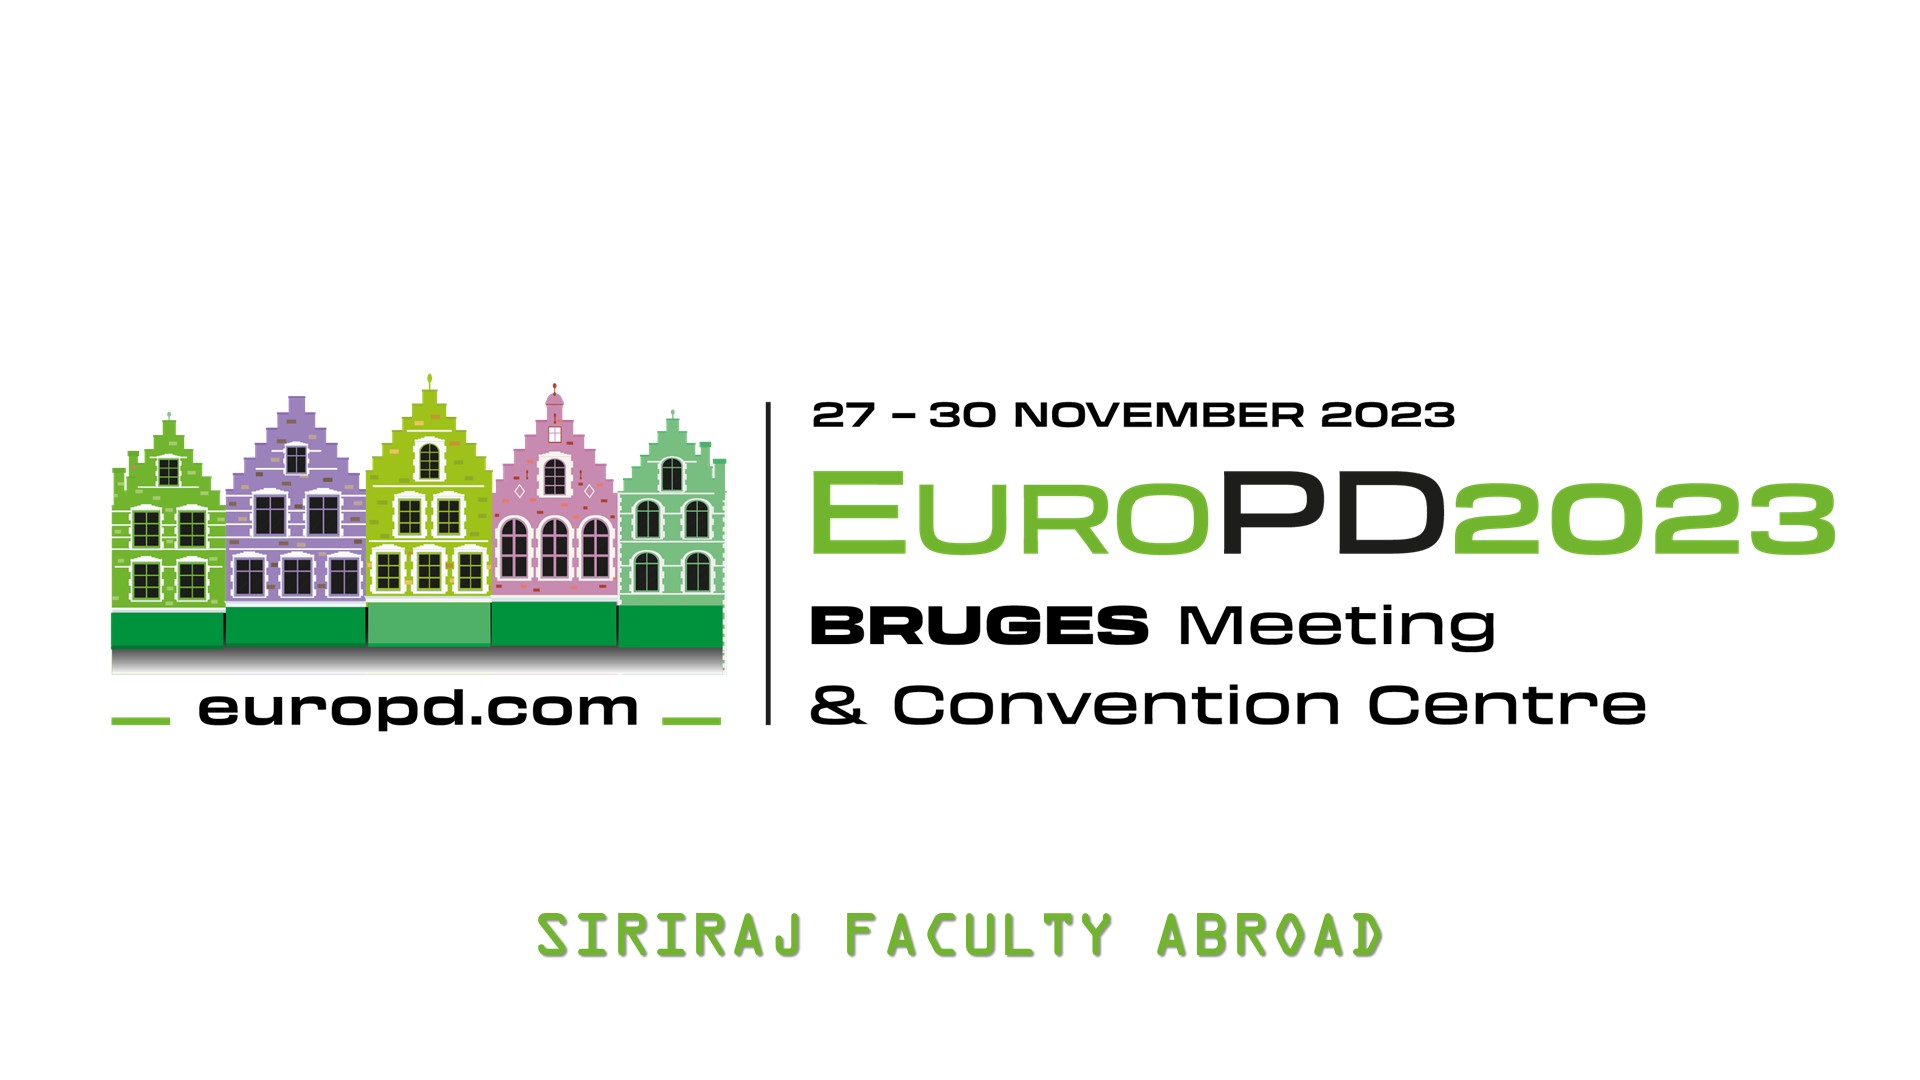 Siriraj Faculty Abroad at the EuroPD 2023 in Belgium